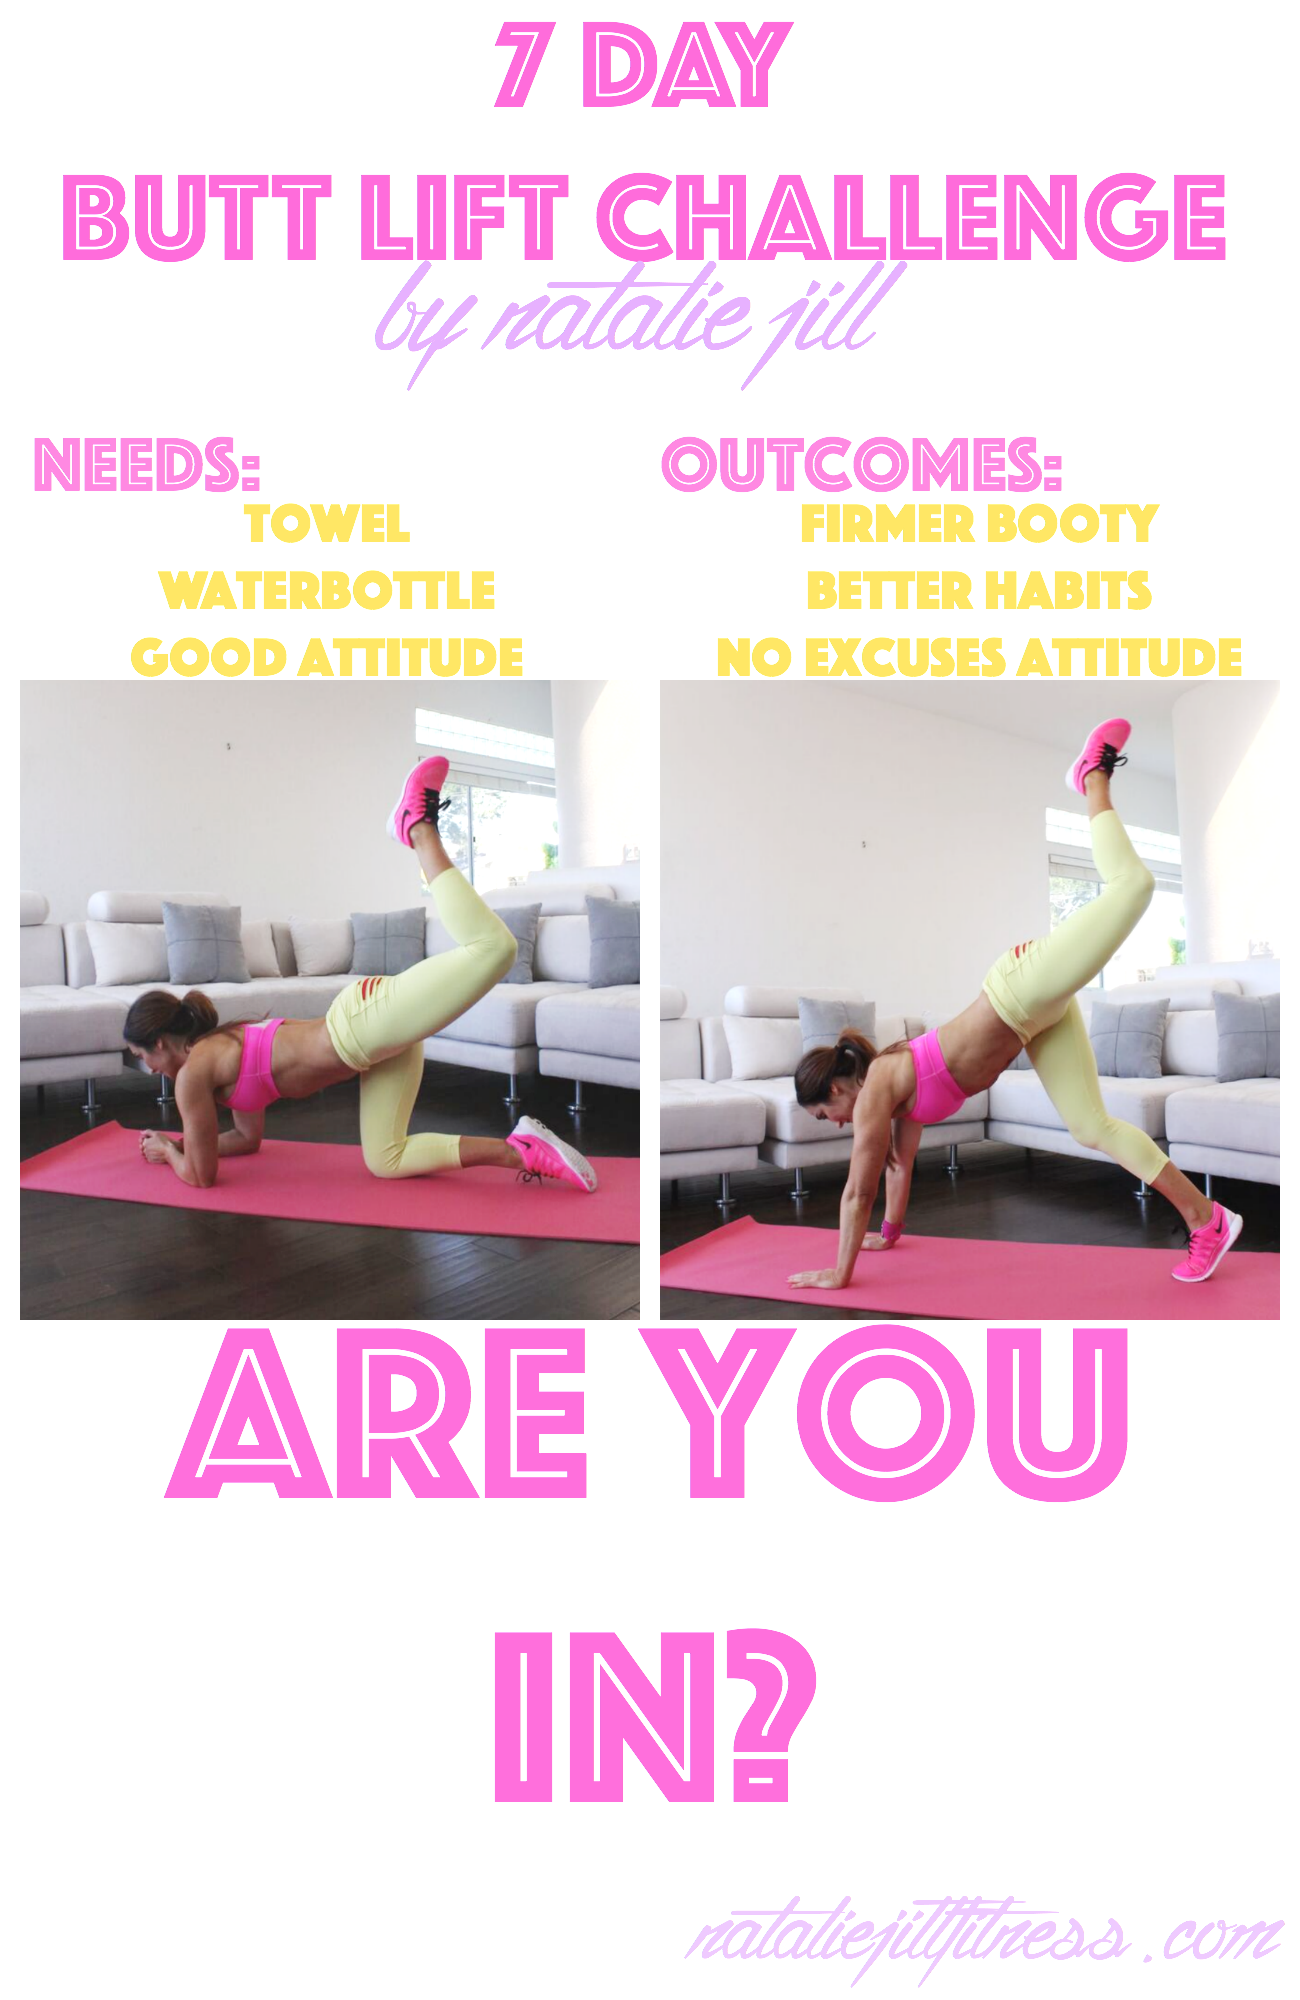 Get the 7 Day Butt Lift Challenge with Natalie Jill